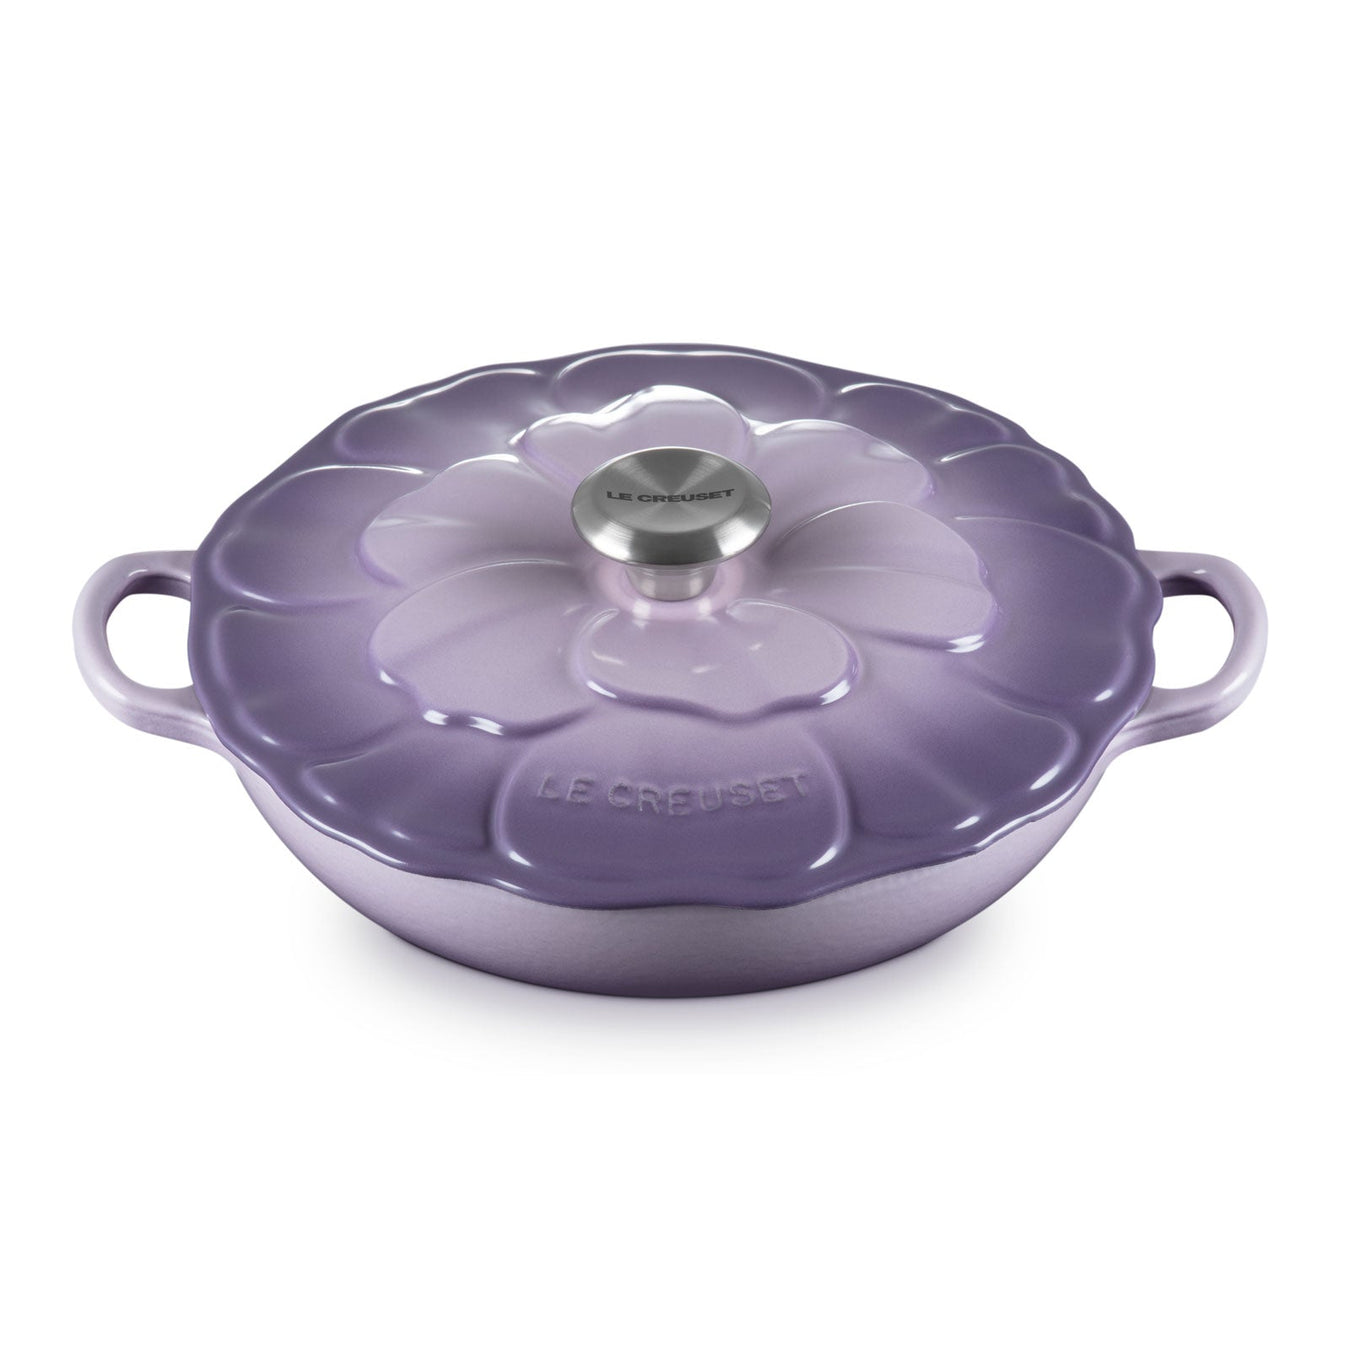 Provence by Le Creuset